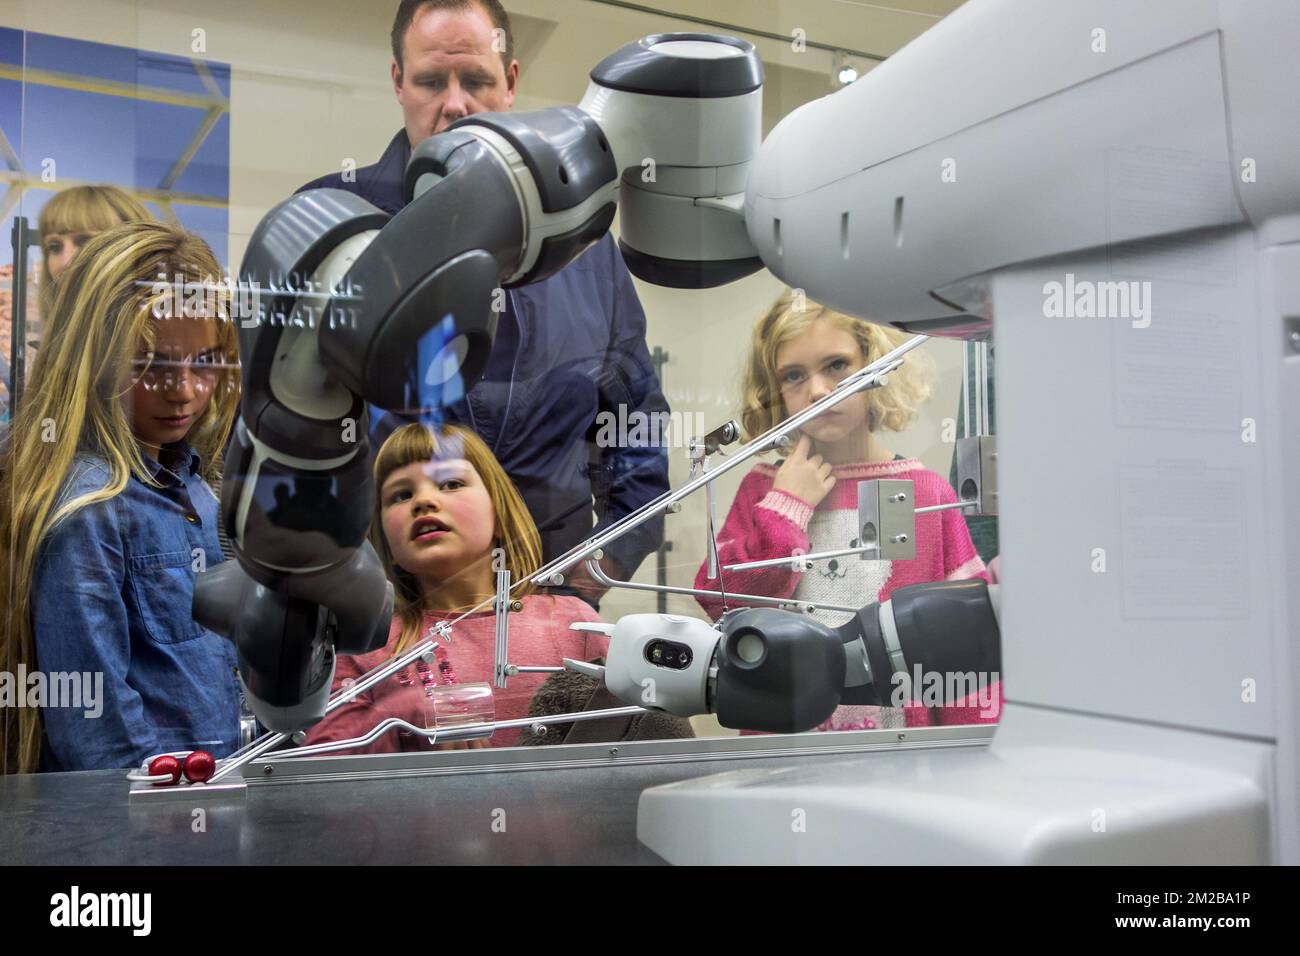 Curious children looking at demonstration with industrial robot arms at exposition about robotics and artificial intelligence / AI | Enfants regardent démonstration d'un robot industriel pendant exposition concernant la robotique et intelligence artificielle 26/11/2017 Stock Photo